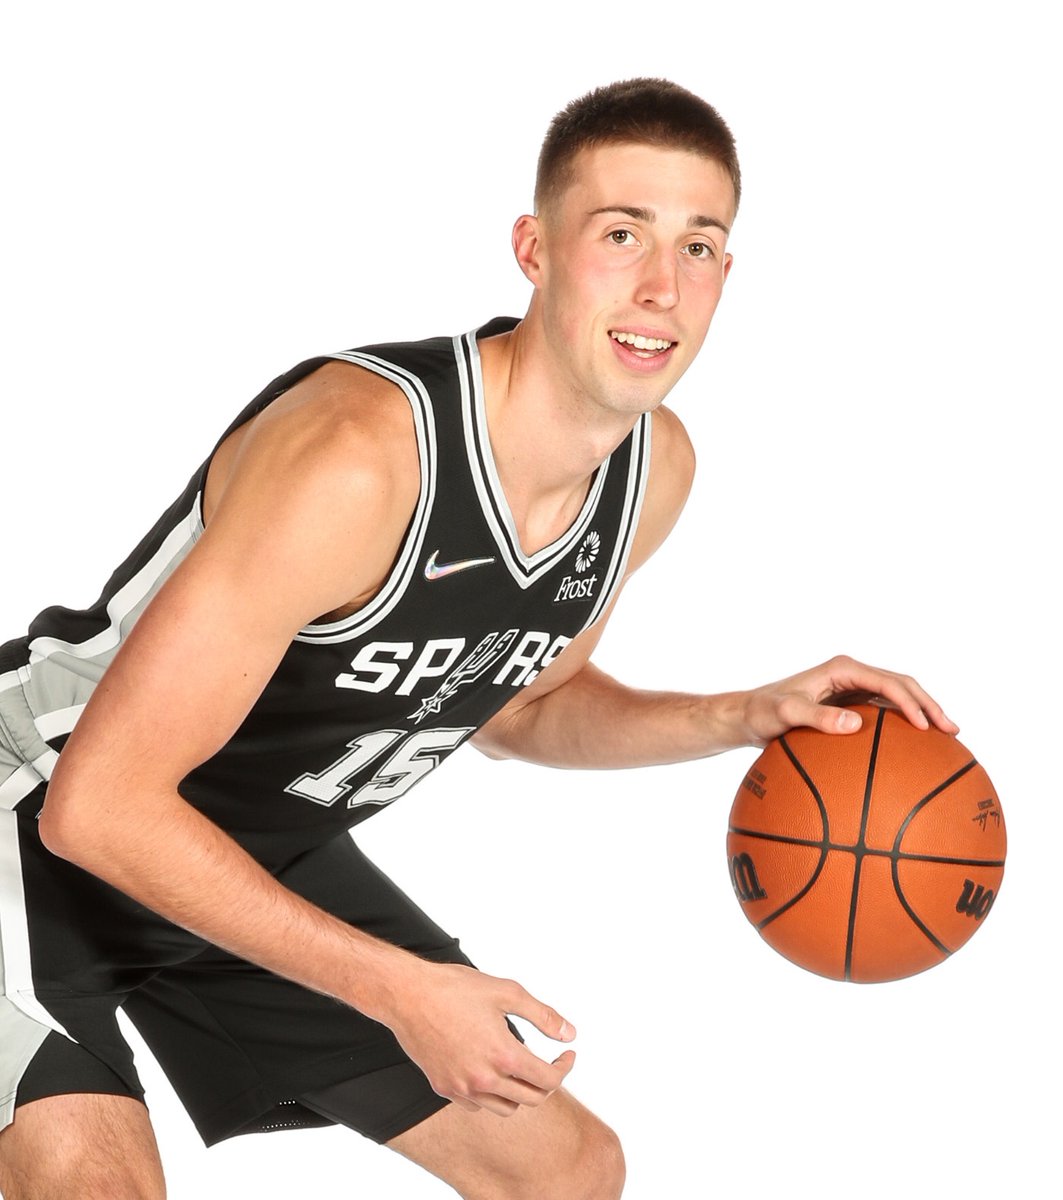 RT @NBA: Join us in wishing @JWieskamp21 of the @spurs a HAPPY 23rd BIRTHDAY! #NBABDAY https://t.co/Mcs08yjcyS